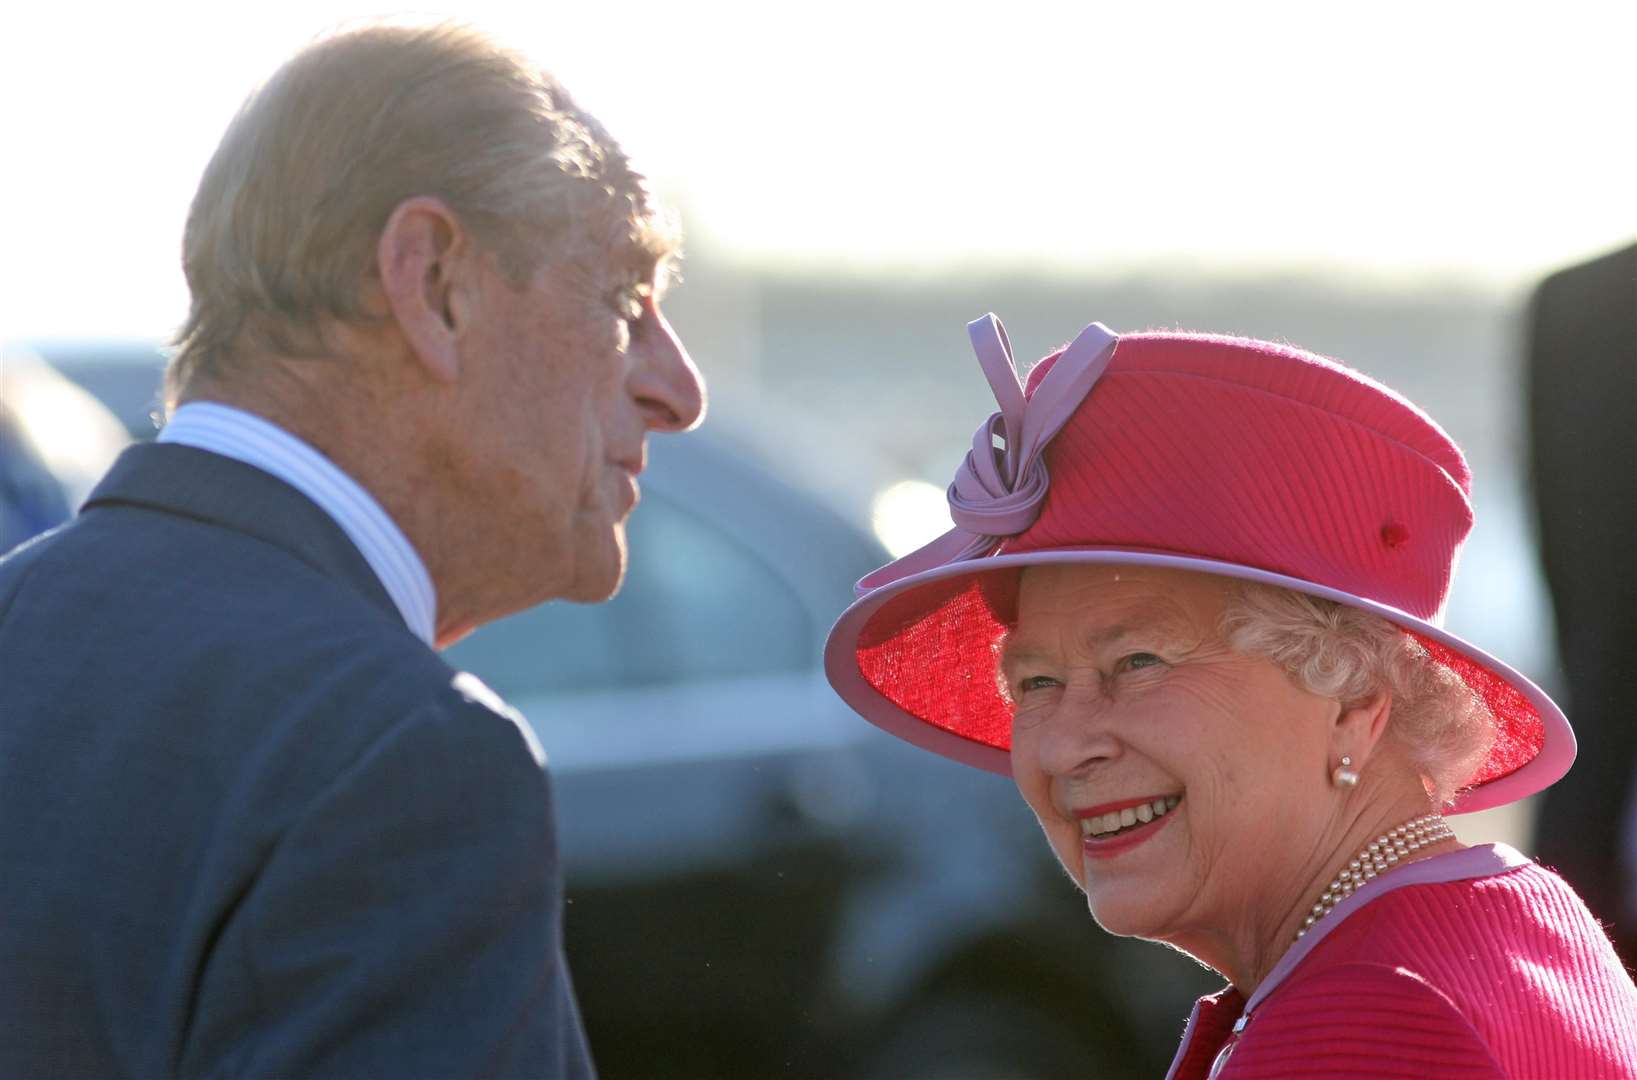 The Queen and Philip were married for more than 70 years (Chris Radburn/PA)